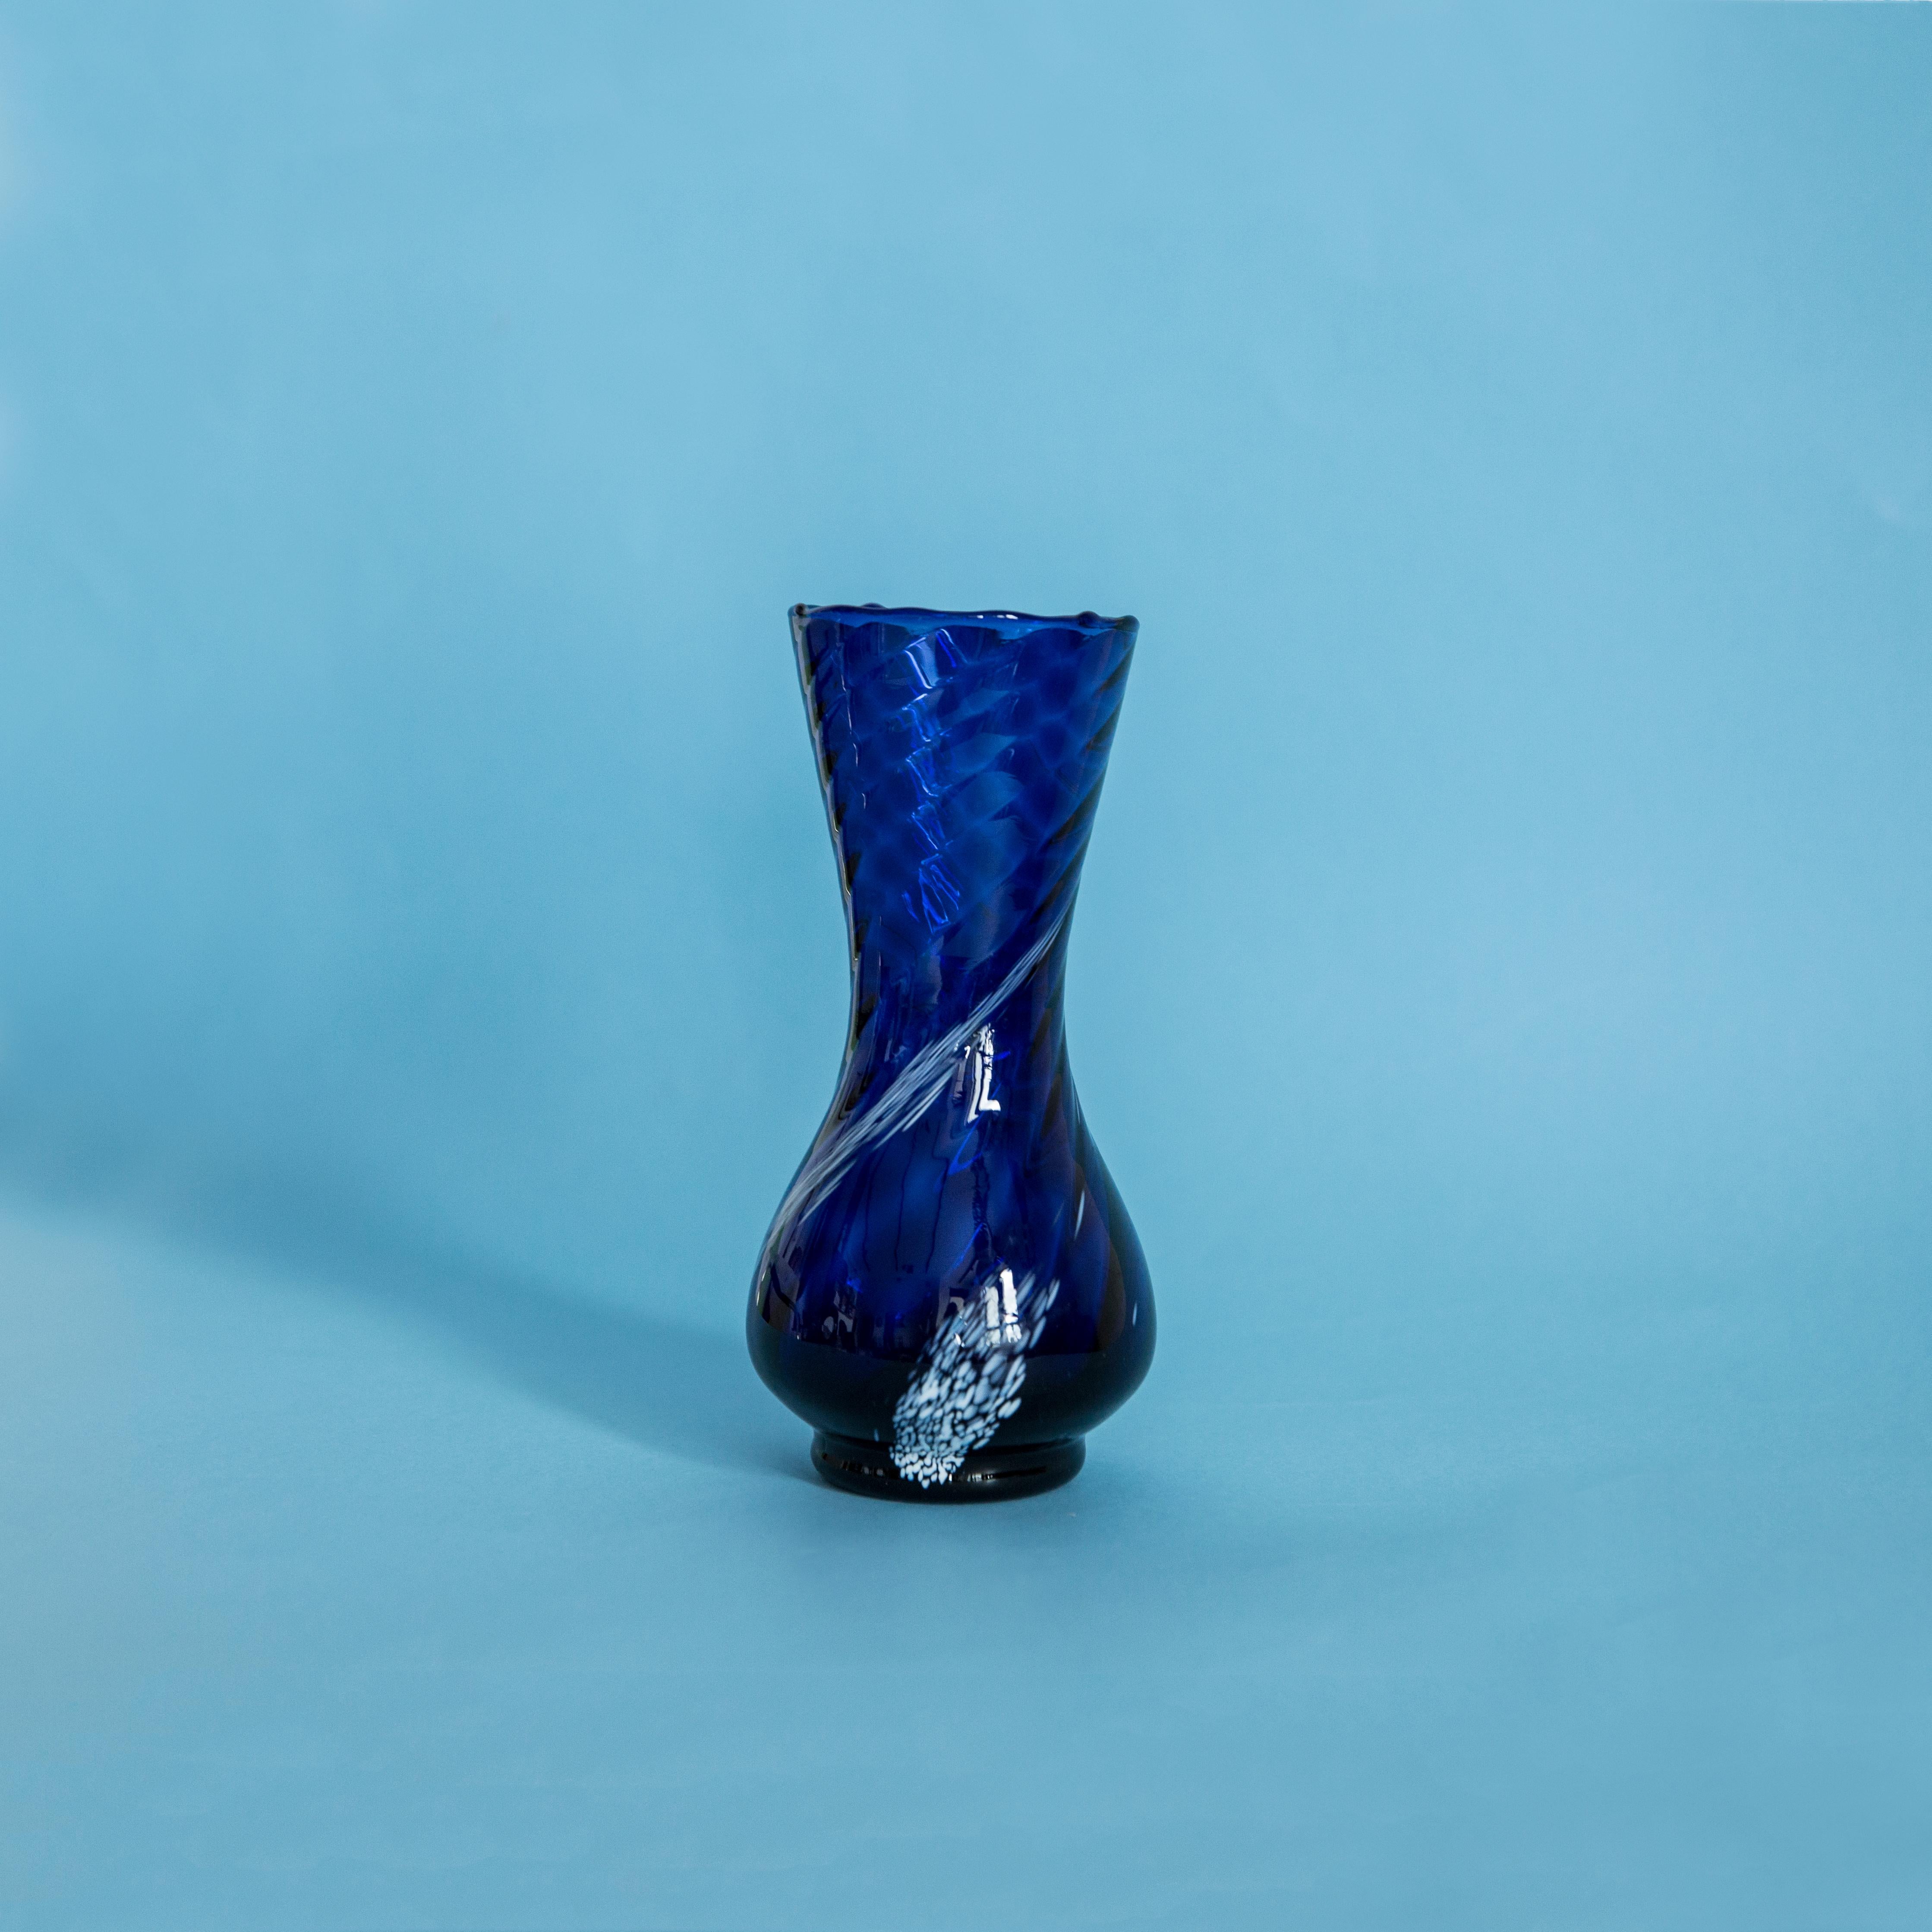 Blue and white vase in amazing organic shape. 
Produced in 1960s. Glass in perfect condition. 
The vase looks like it has just been taken out of the box.

No jags, defects, etc. The outer relief surface, the inner smooth. Thick glass vase,